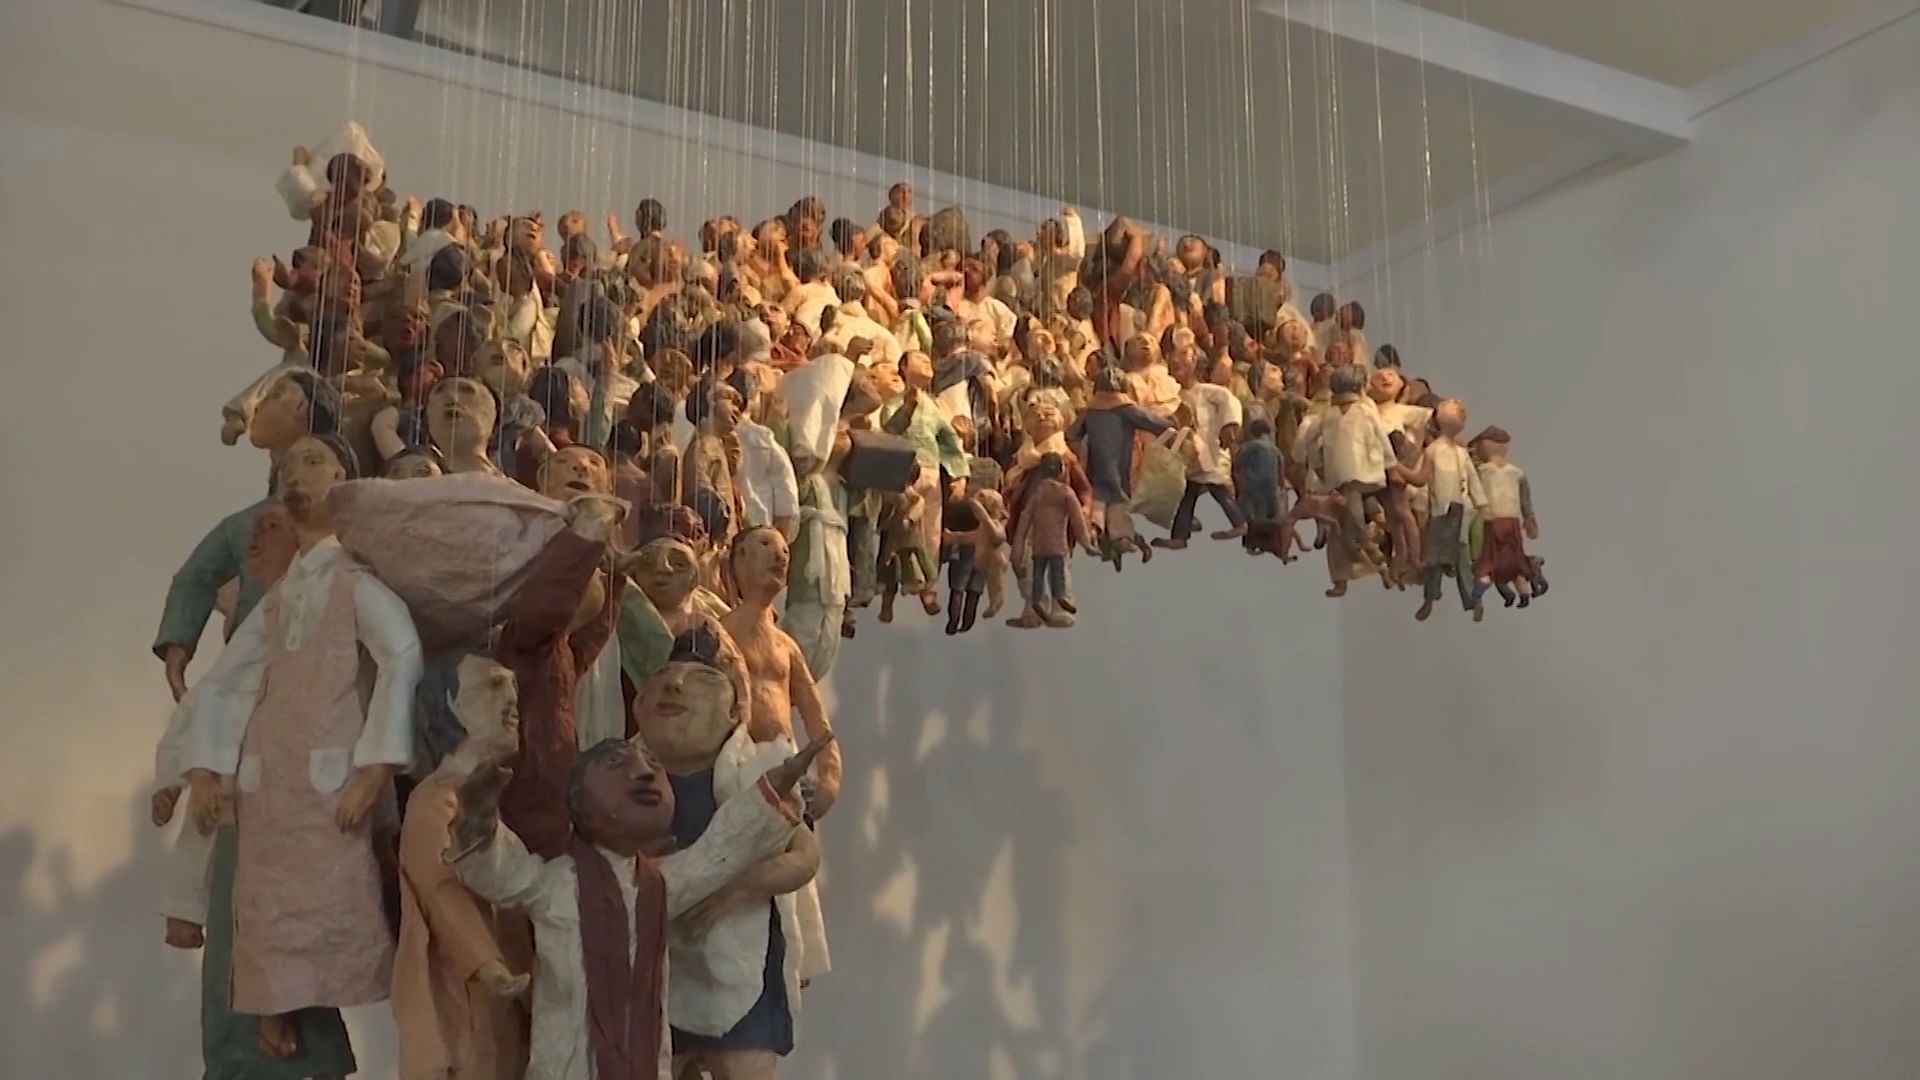 Sculptures hanging by a thread depict the plight of displaced people